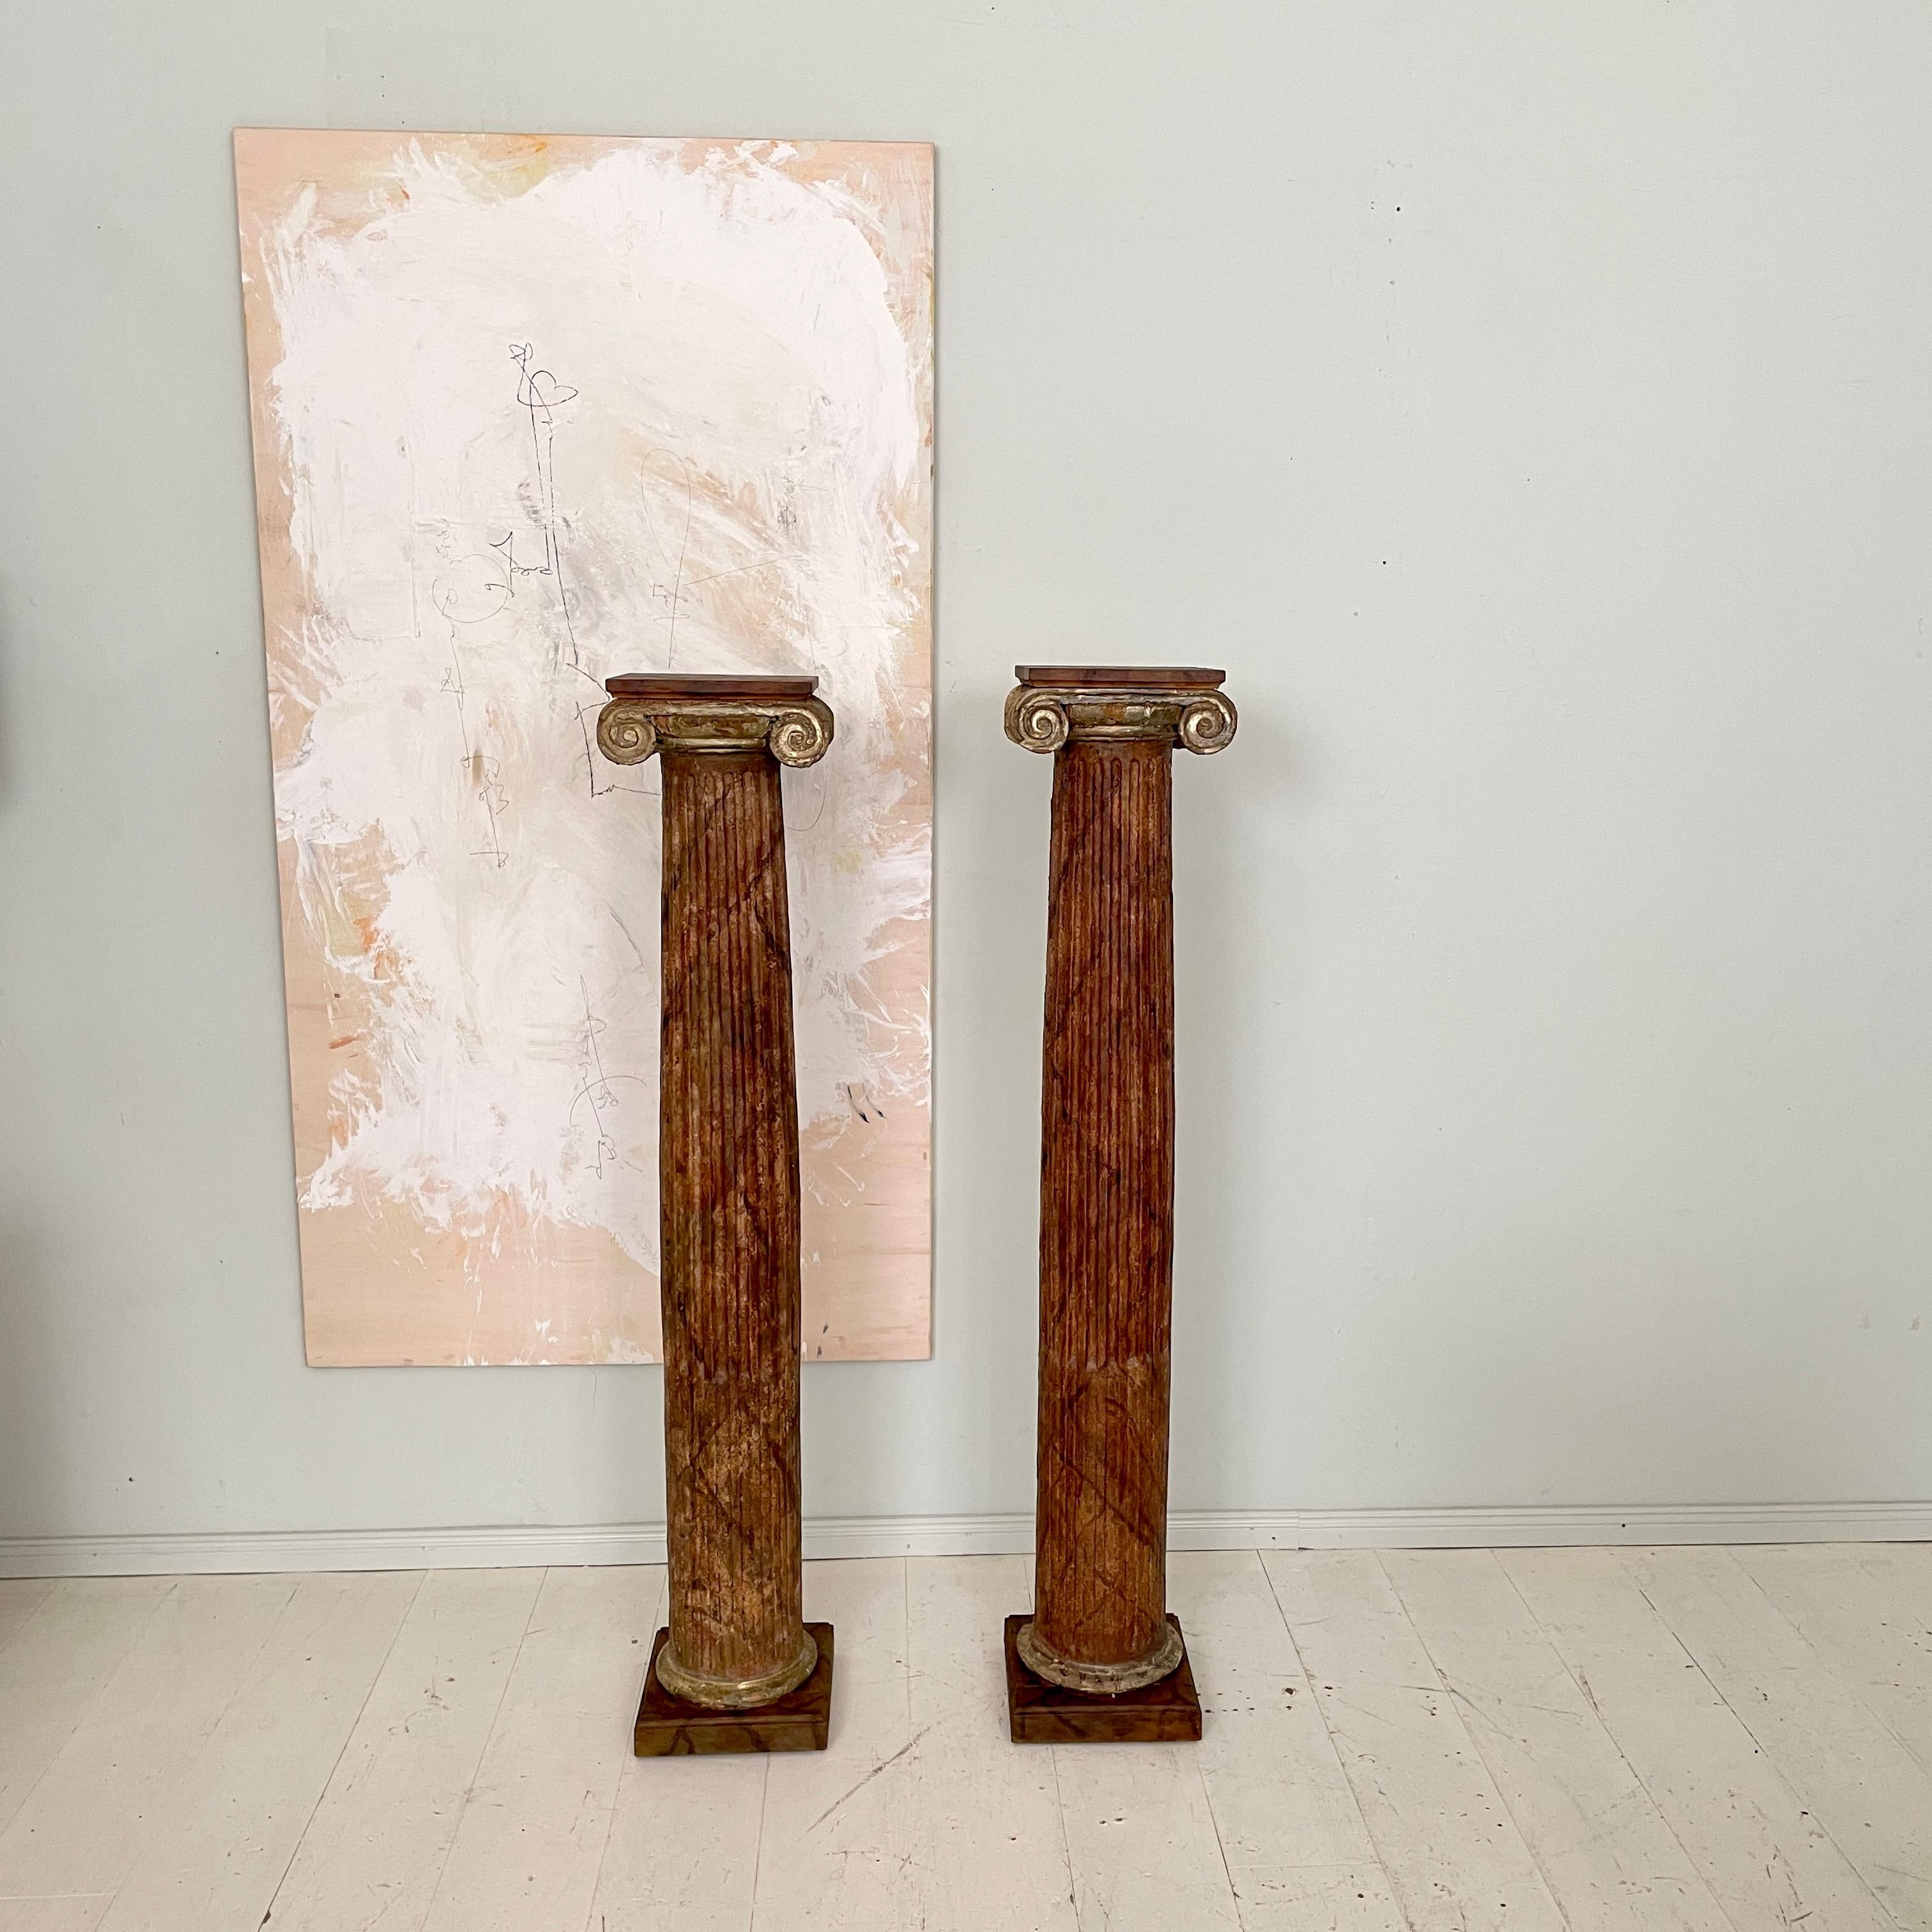 This beautiful Pair of Early 19th Century Wood Columns Lacquered in Faux Marble has been made around 1800.
They are in a beautiful original condition. Apart of the two top lid parts, which have been re-lacquered or replaced at some part.
Great